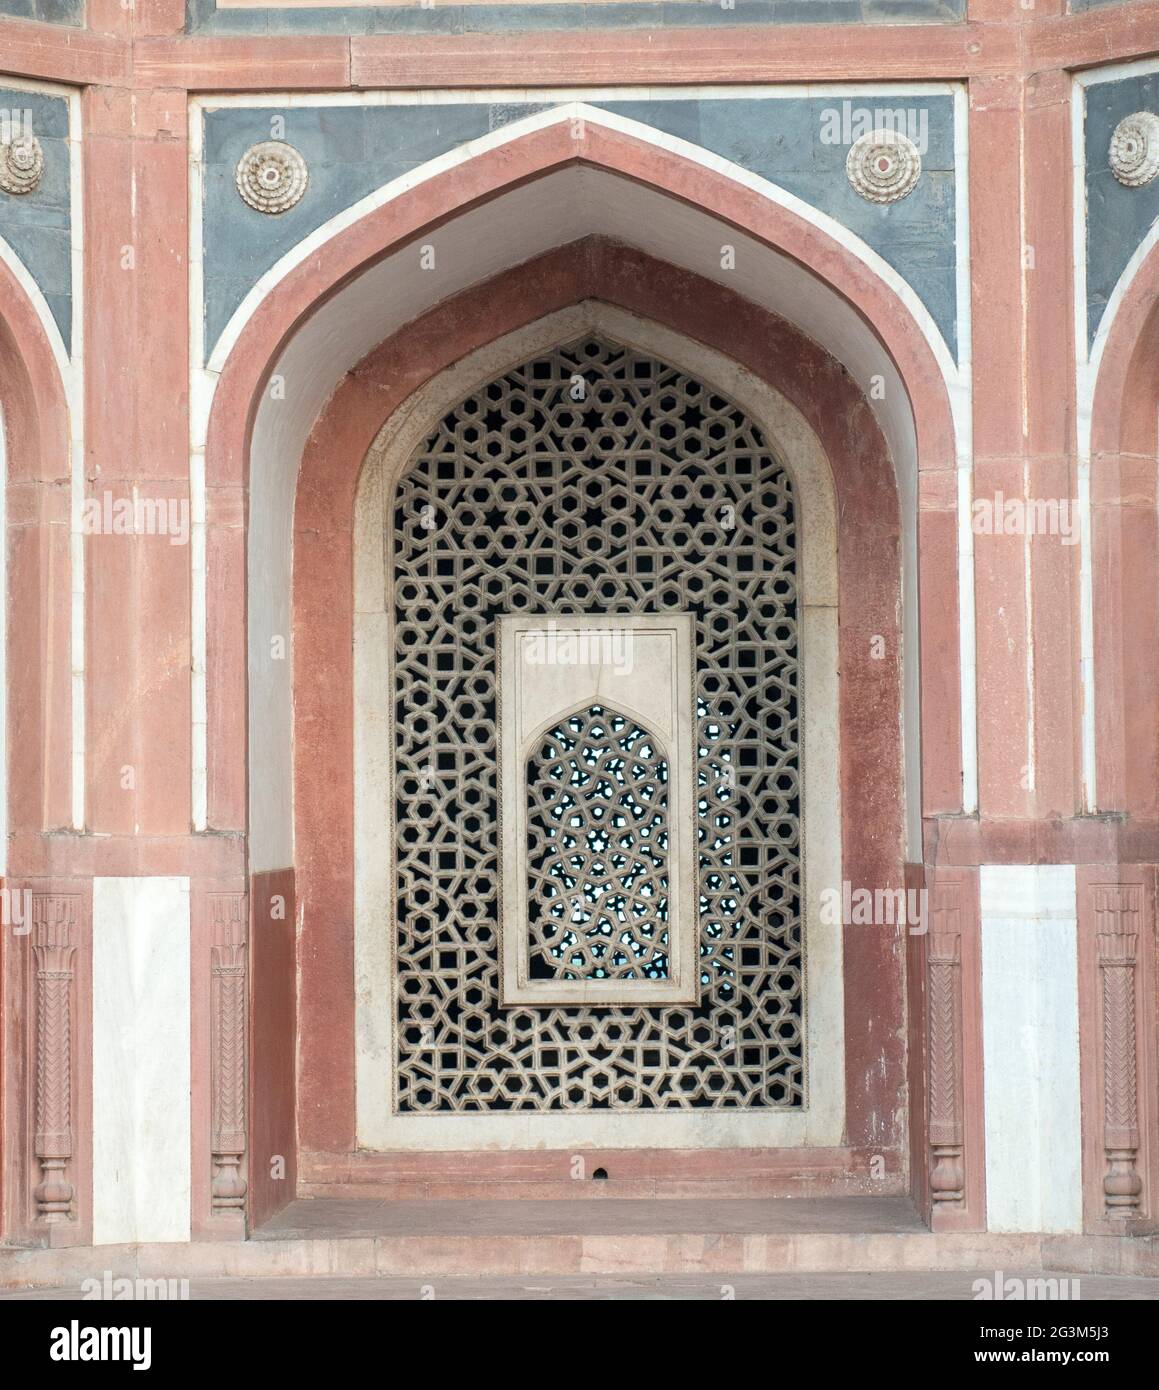 Humayun's Tomb, New Delhi, India. Second ruler of the Mughal Dynasty. Built year 1565 Stock Photo